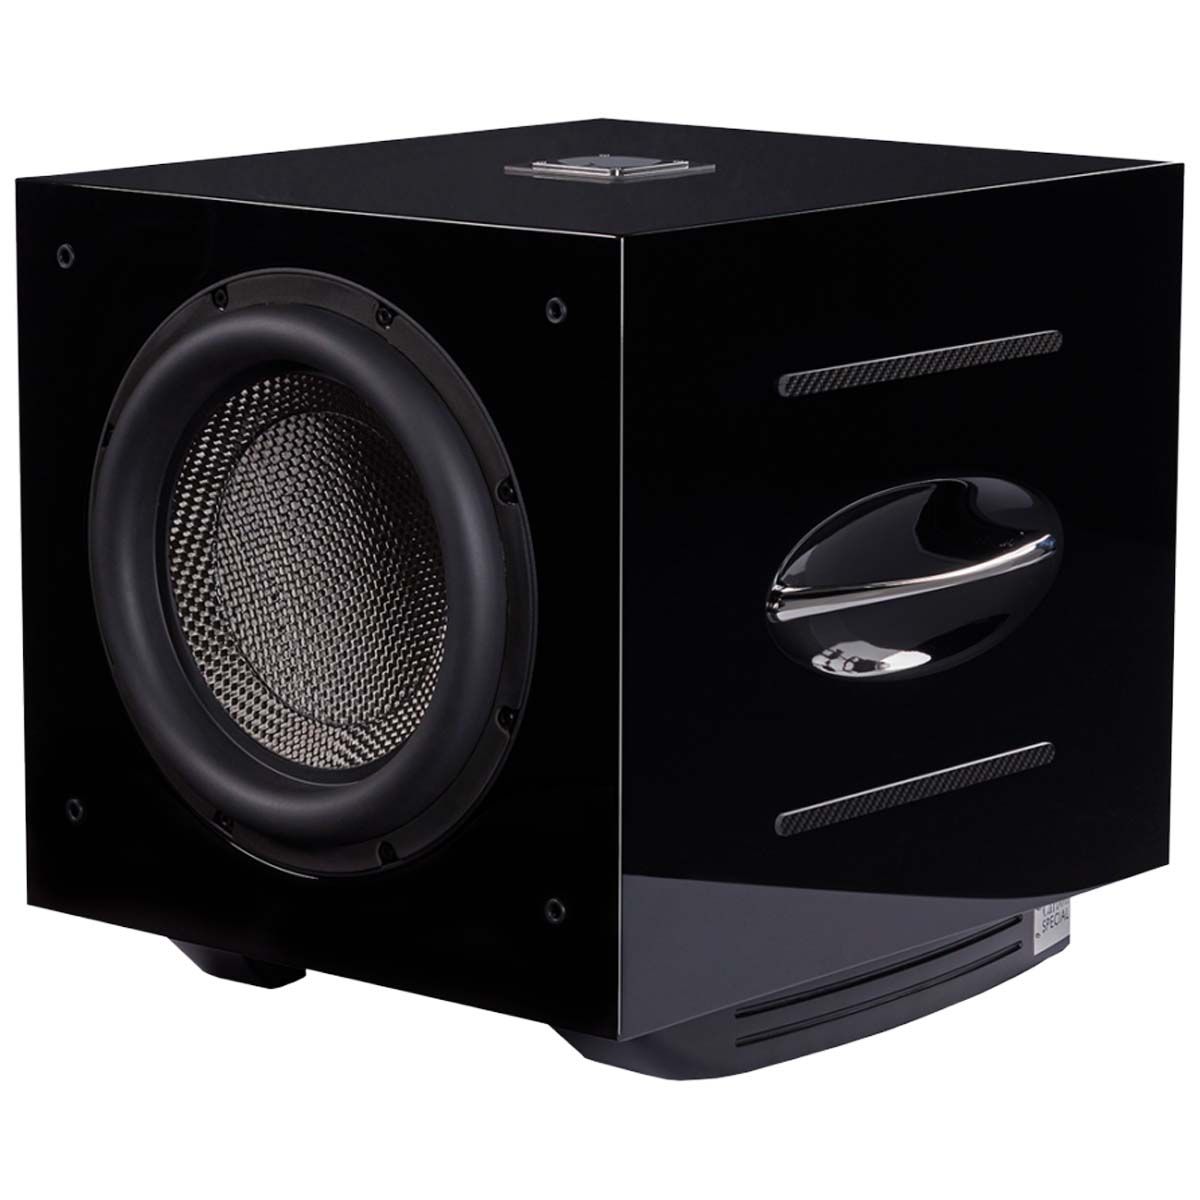 REL Serie S Carbon Special Subwoofer - Piano Black angled front view without grille